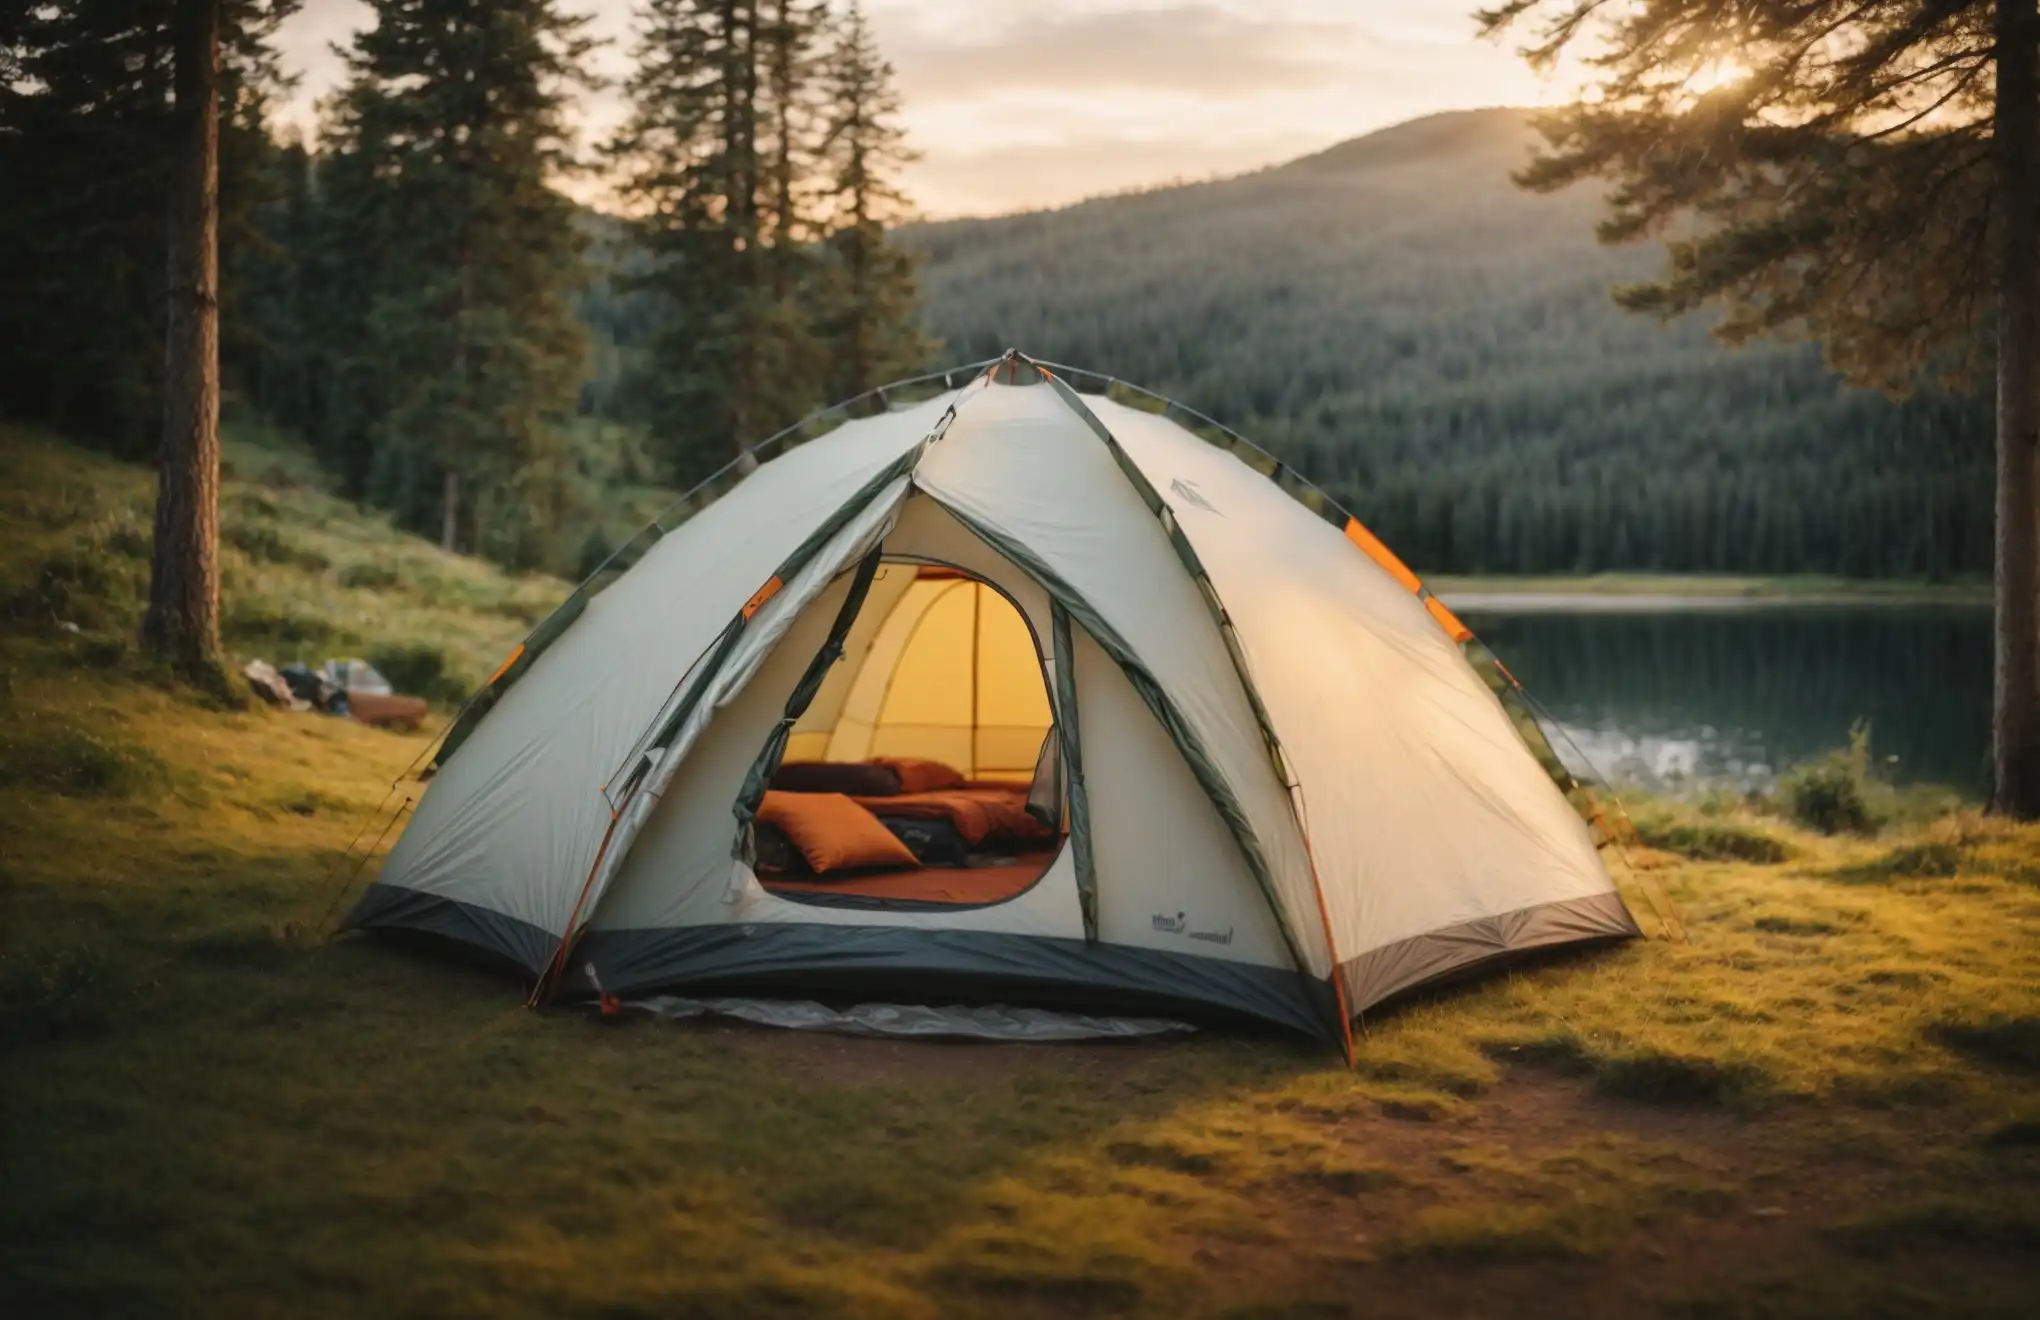 A spacious 4-person tent set in a scenic outdoor environment